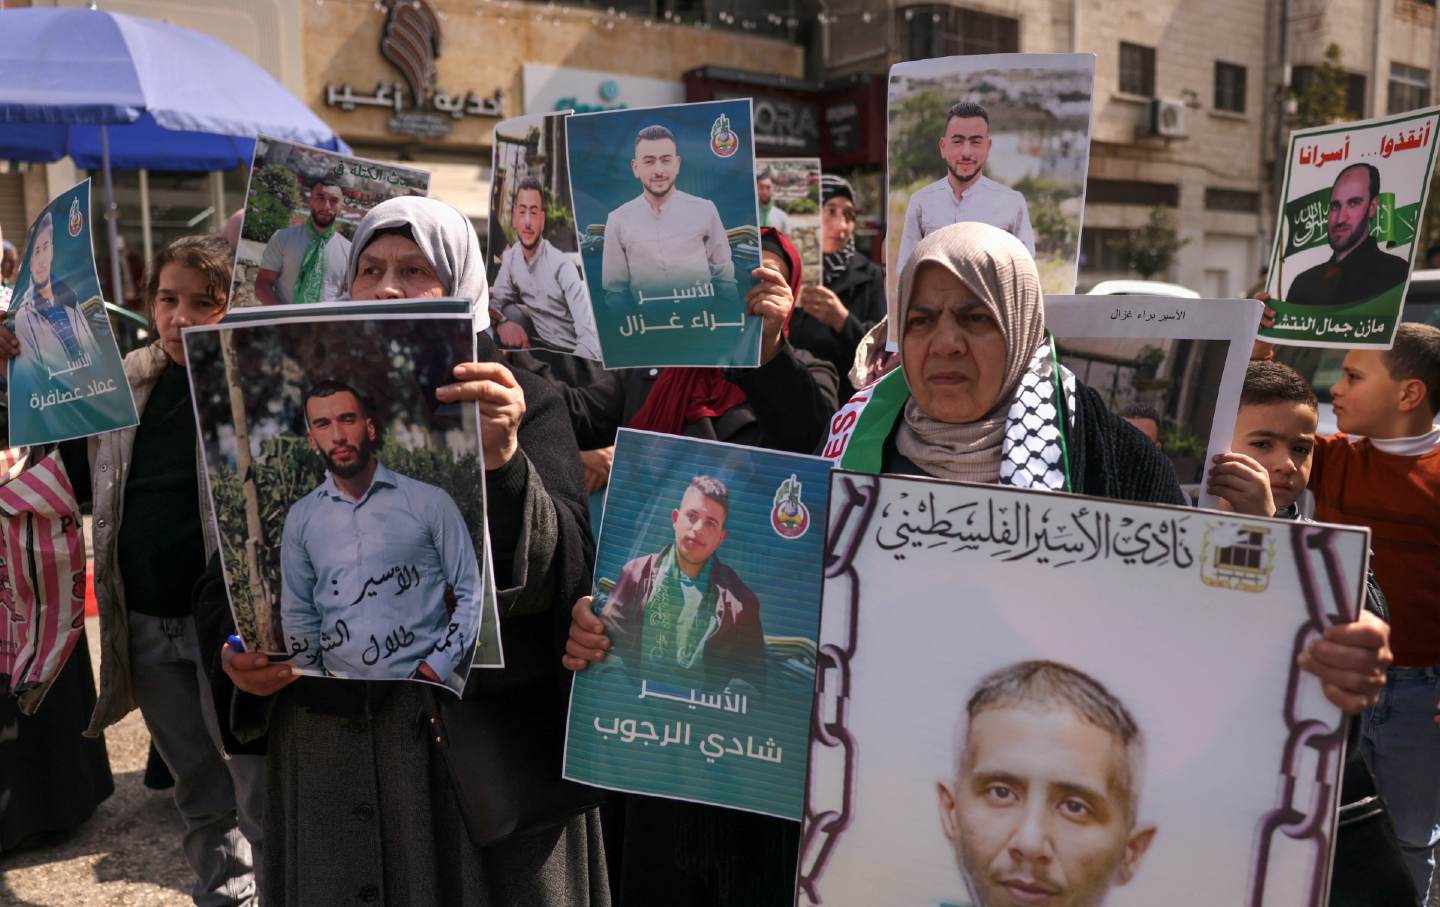 Relatives and friends of Palestinians imprisoned in Israel lift signs at a rally calling for their release and the return of the bodies of those who died during incarceration, in Hebron in the occupied West Bank on February 27, 2024.